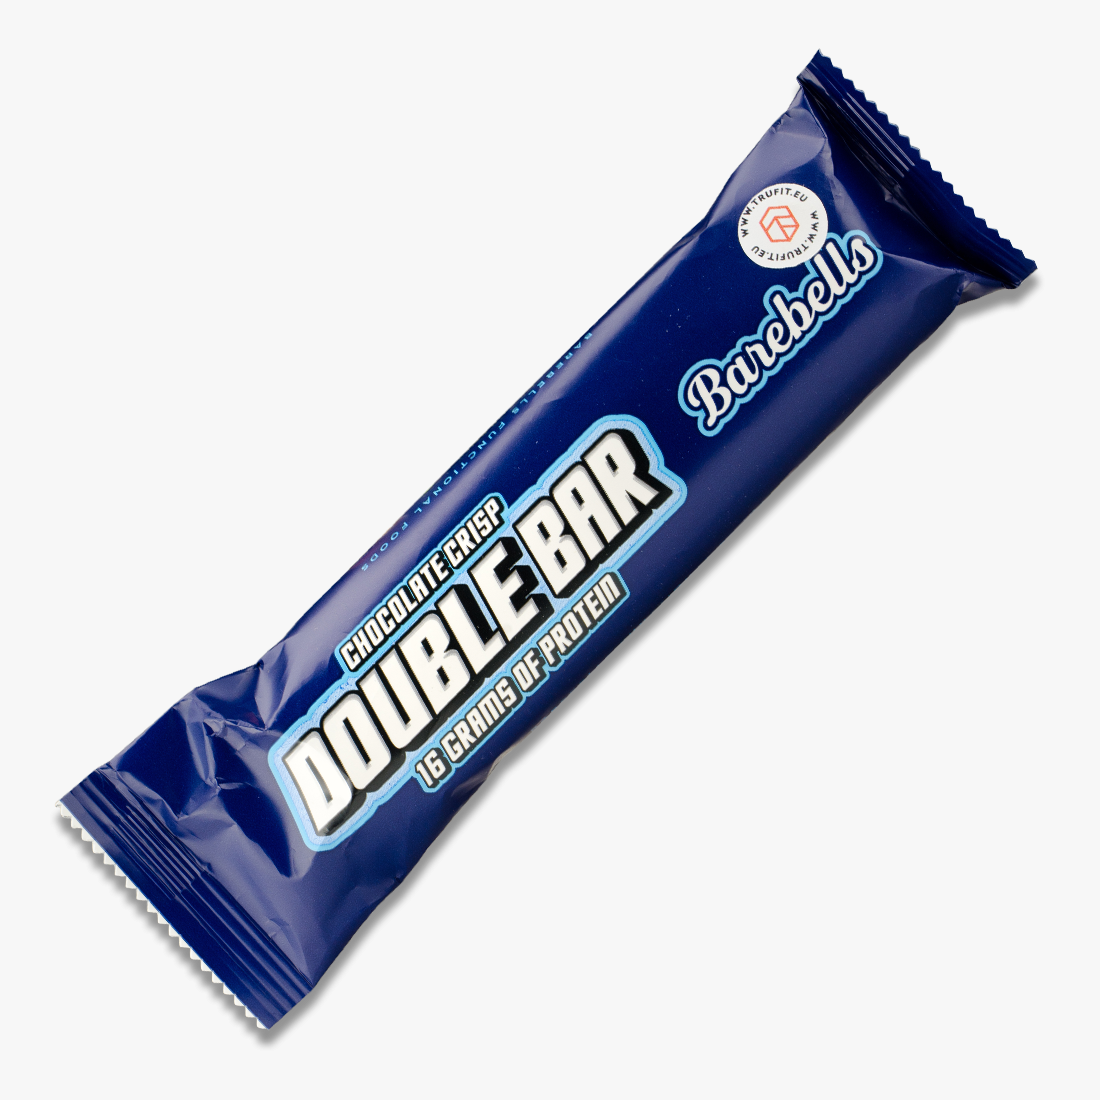 Barebells - Double Protein Bar - Irresistible protein bar - TRU·FIT